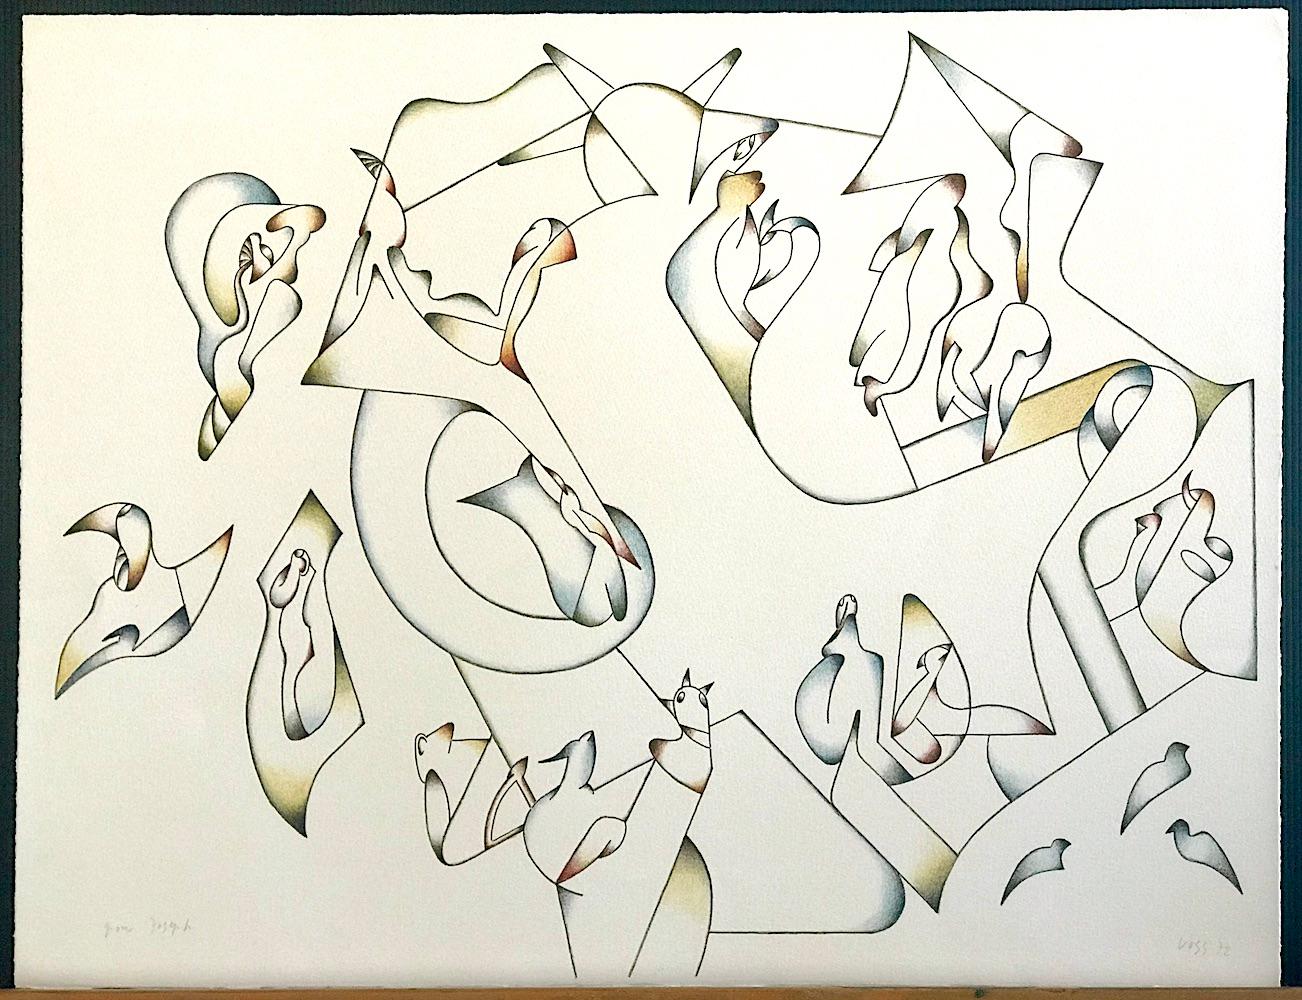 Abstract 2 is an original hand drawn lithograph by the German artist Jan Voss, printed using hand lithography techniques on archival Arches paper 100% acid free. Abstract 2 presents a free form conceptual calligraphy drawing; a Modernist style